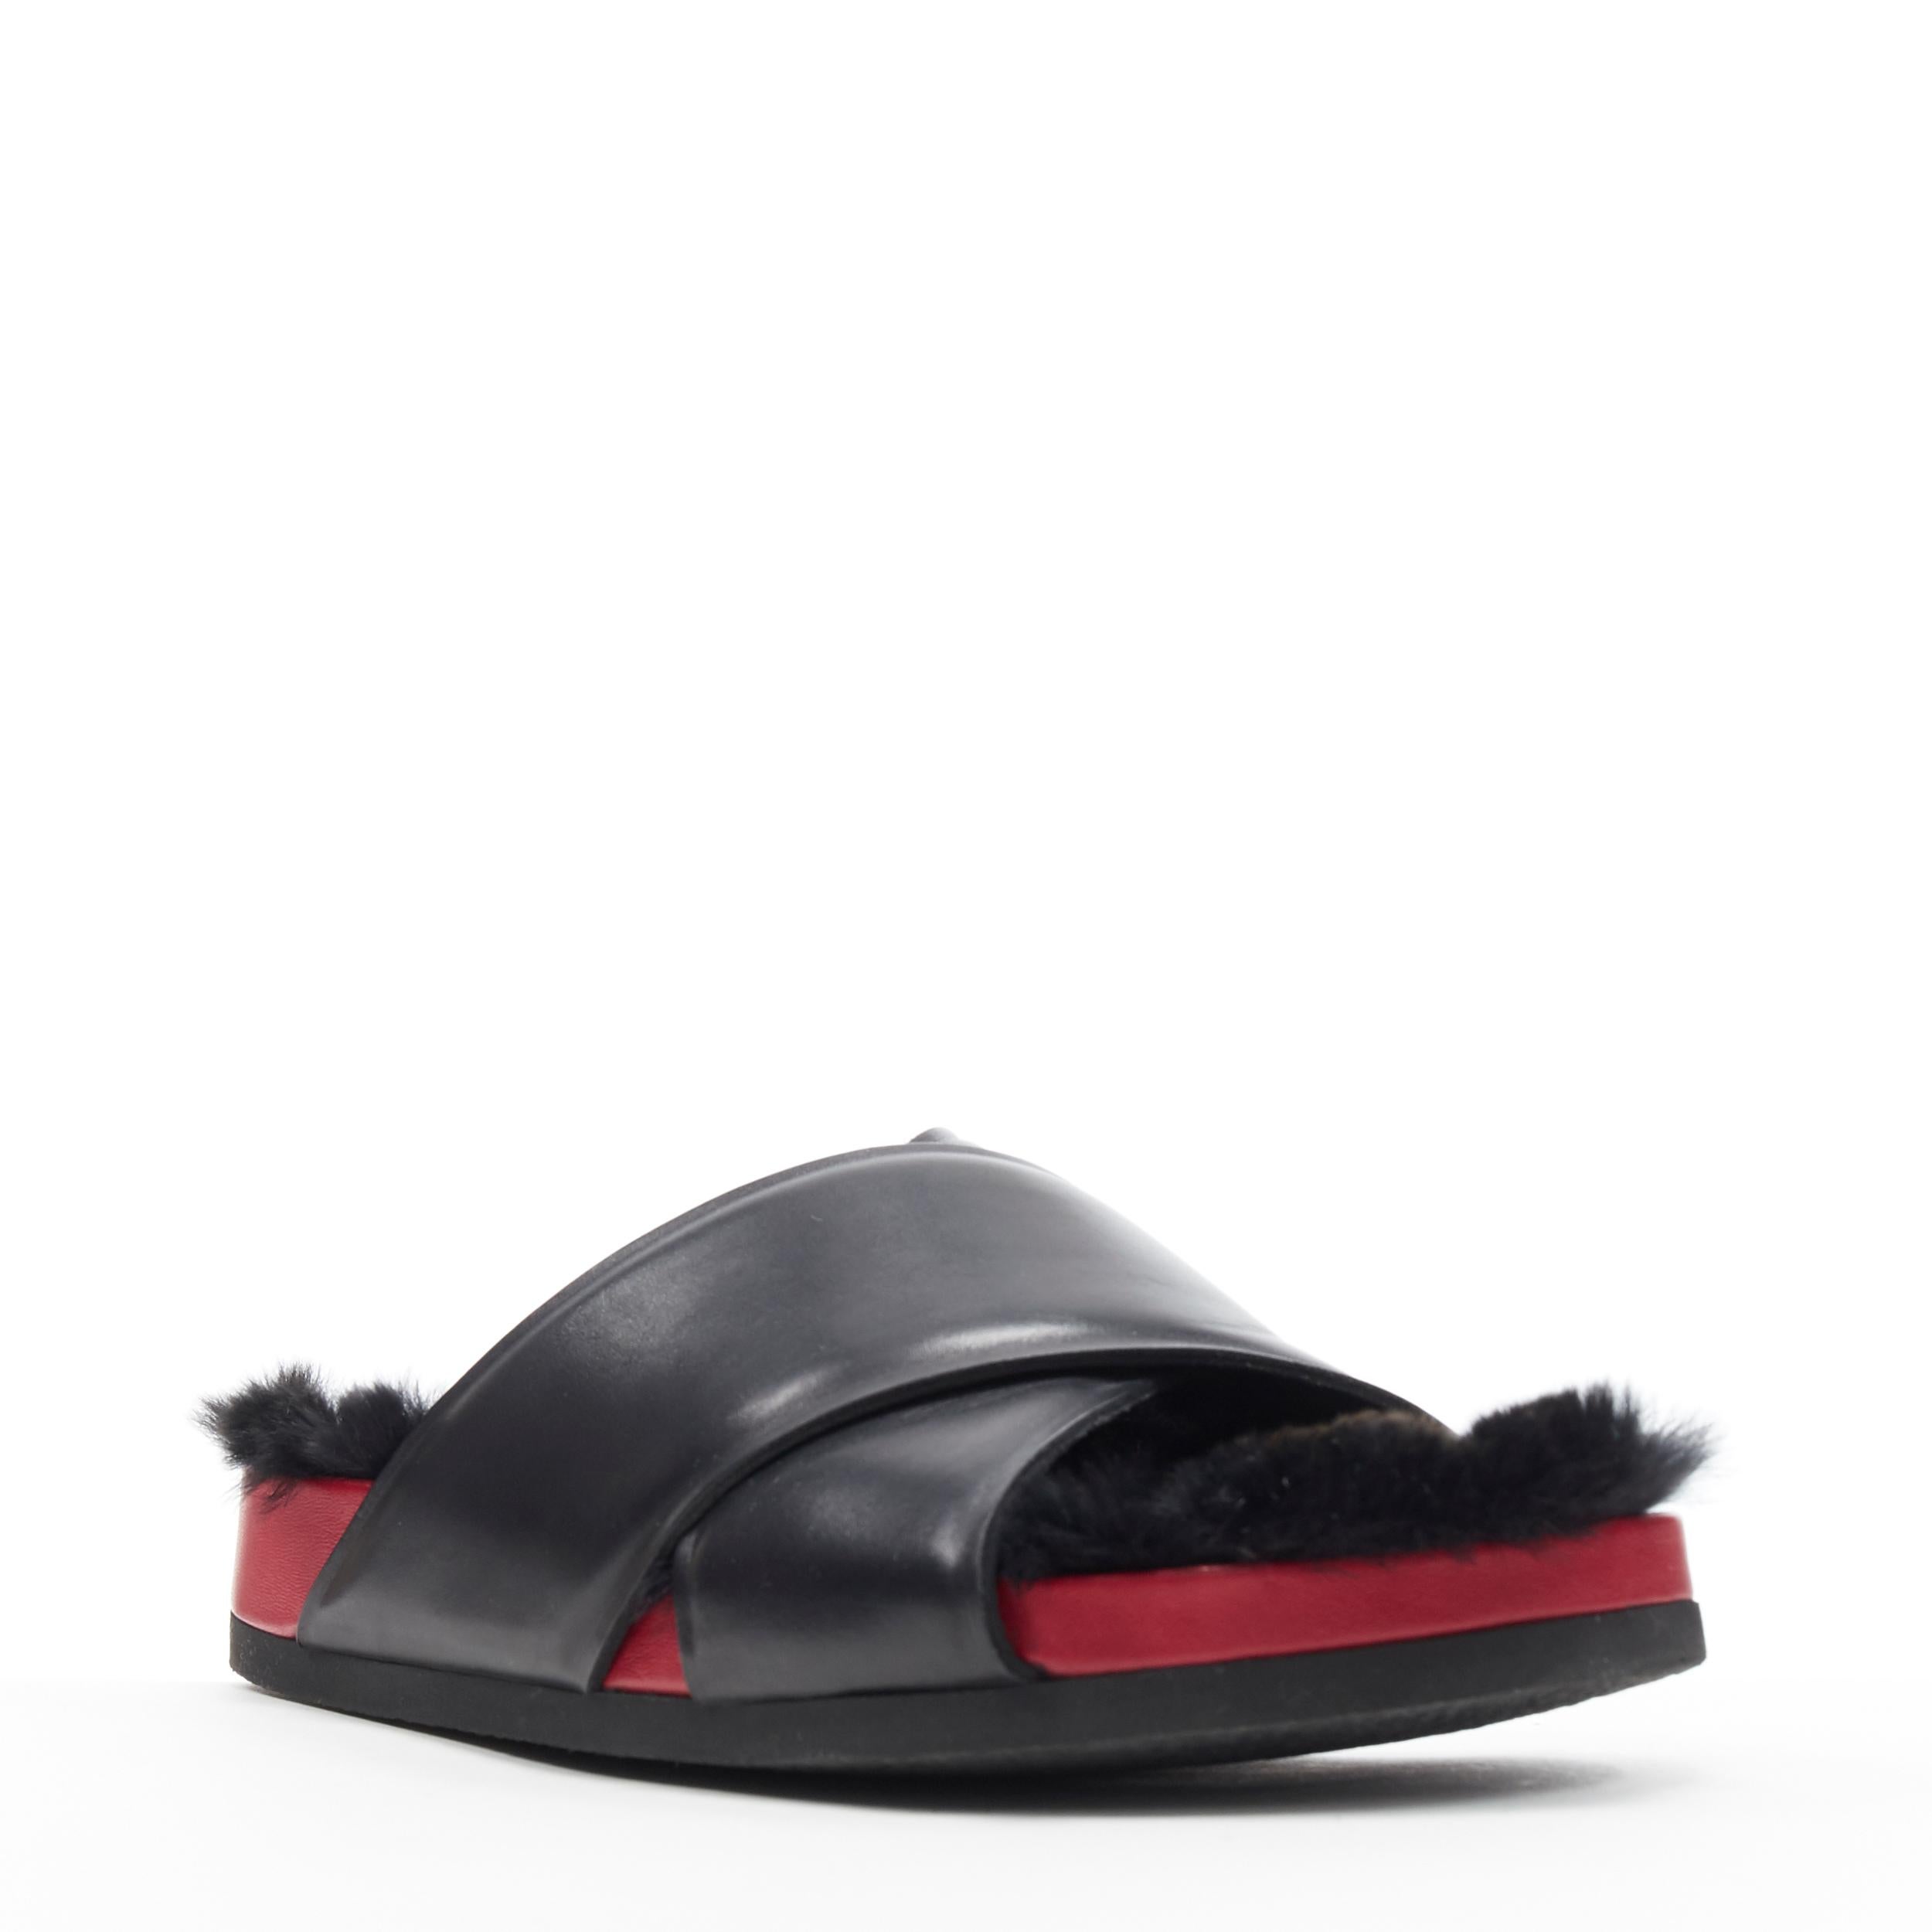 new OLD CELINE PHOEBE PHILO red white leather Twist Boxy slides sandals EU37
Brand: Celine
Designer: Phoebe Philo
Model Name / Style: Boxy slides
Material: Leather
Color: Red, white
Pattern: Solid
Extra Detail: Boxy sandals. Red grosgrain twisted